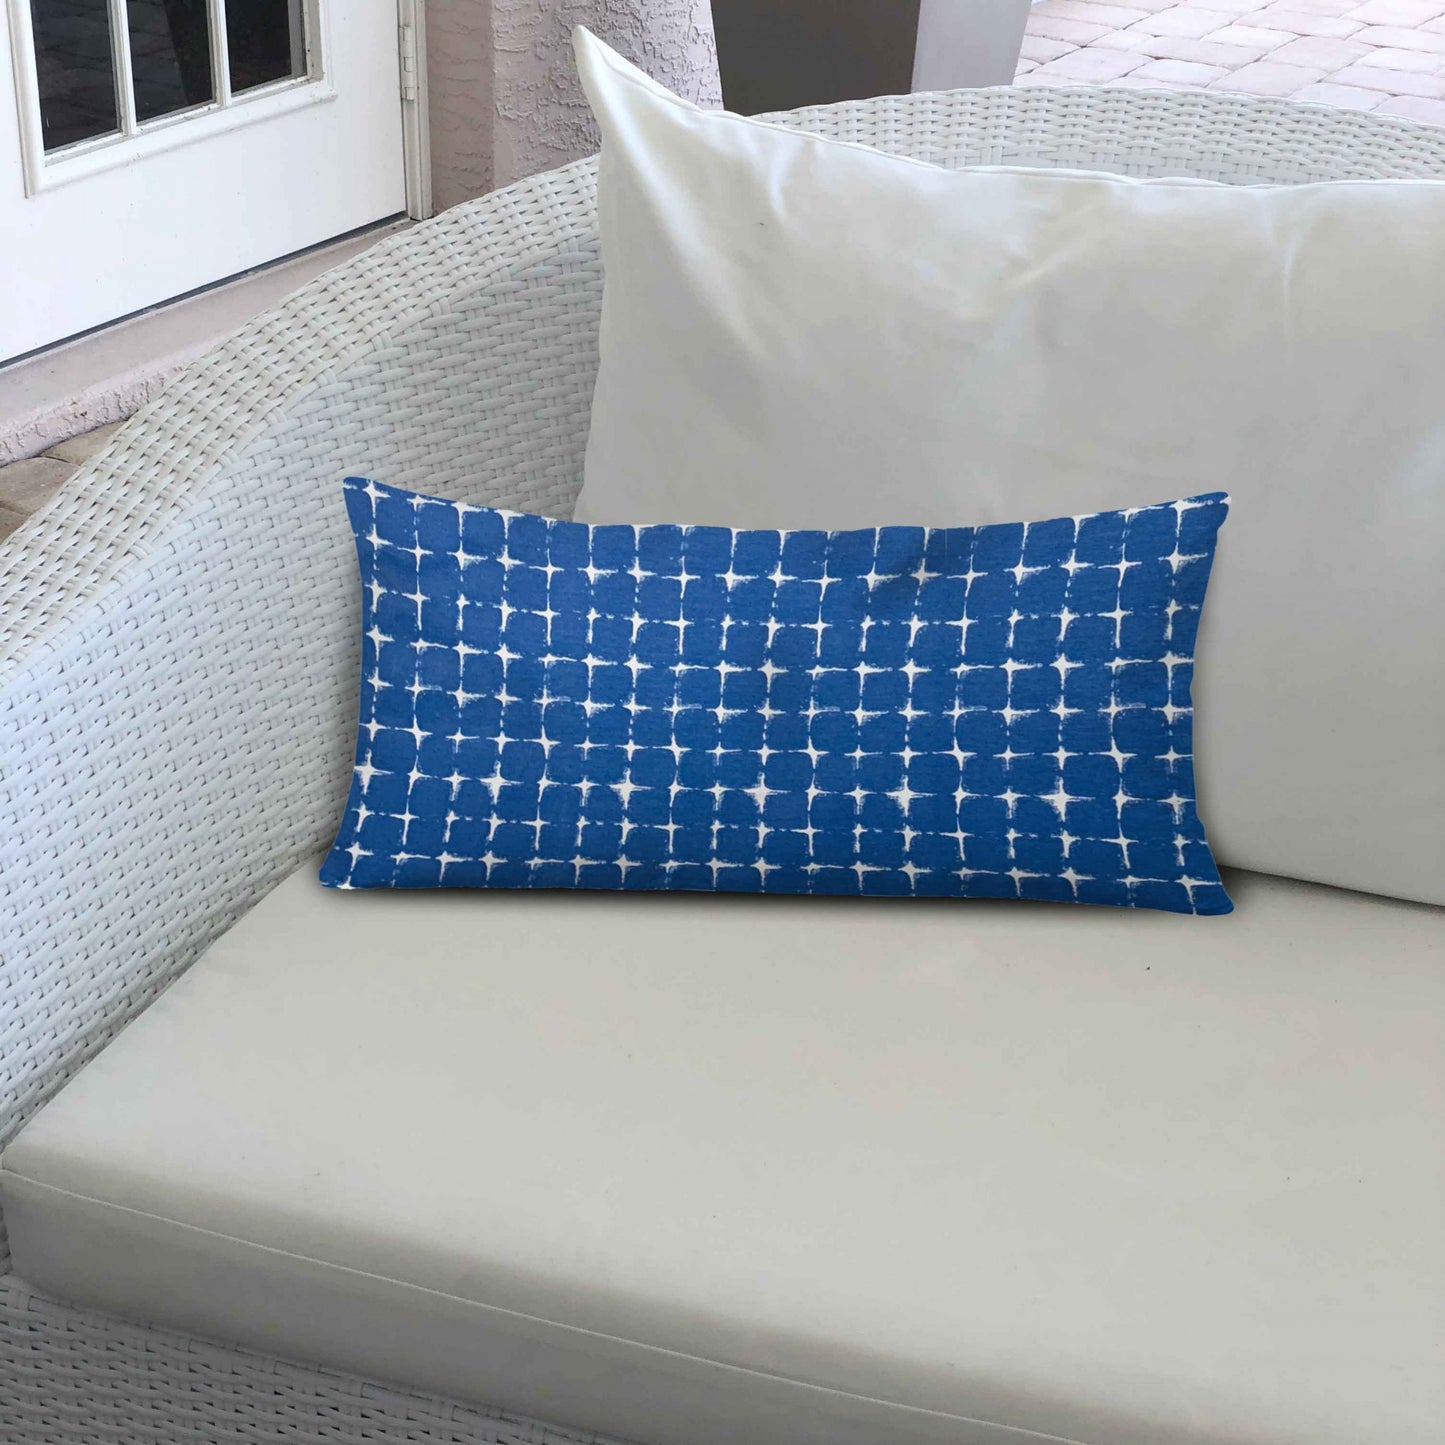 12" X 18" Blue And White Enveloped Gingham Lumbar Indoor Outdoor Pillow